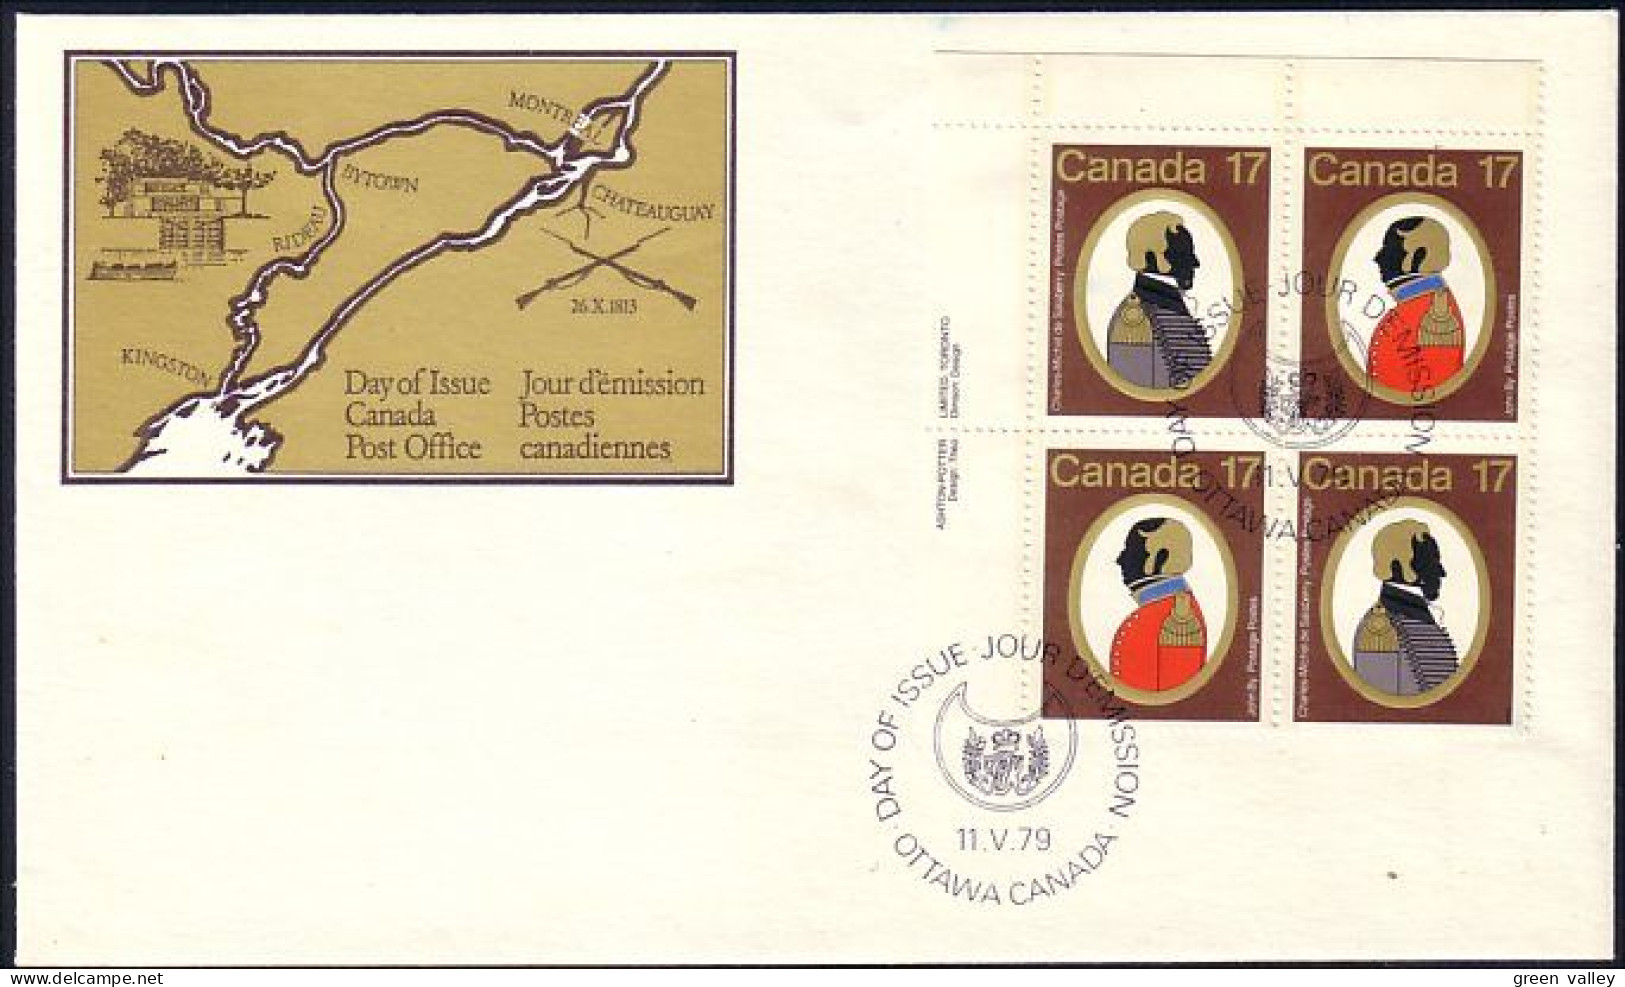 Canada Salaberry John By Bloc Coin FDC Cover ( A72 287) - 1971-1980